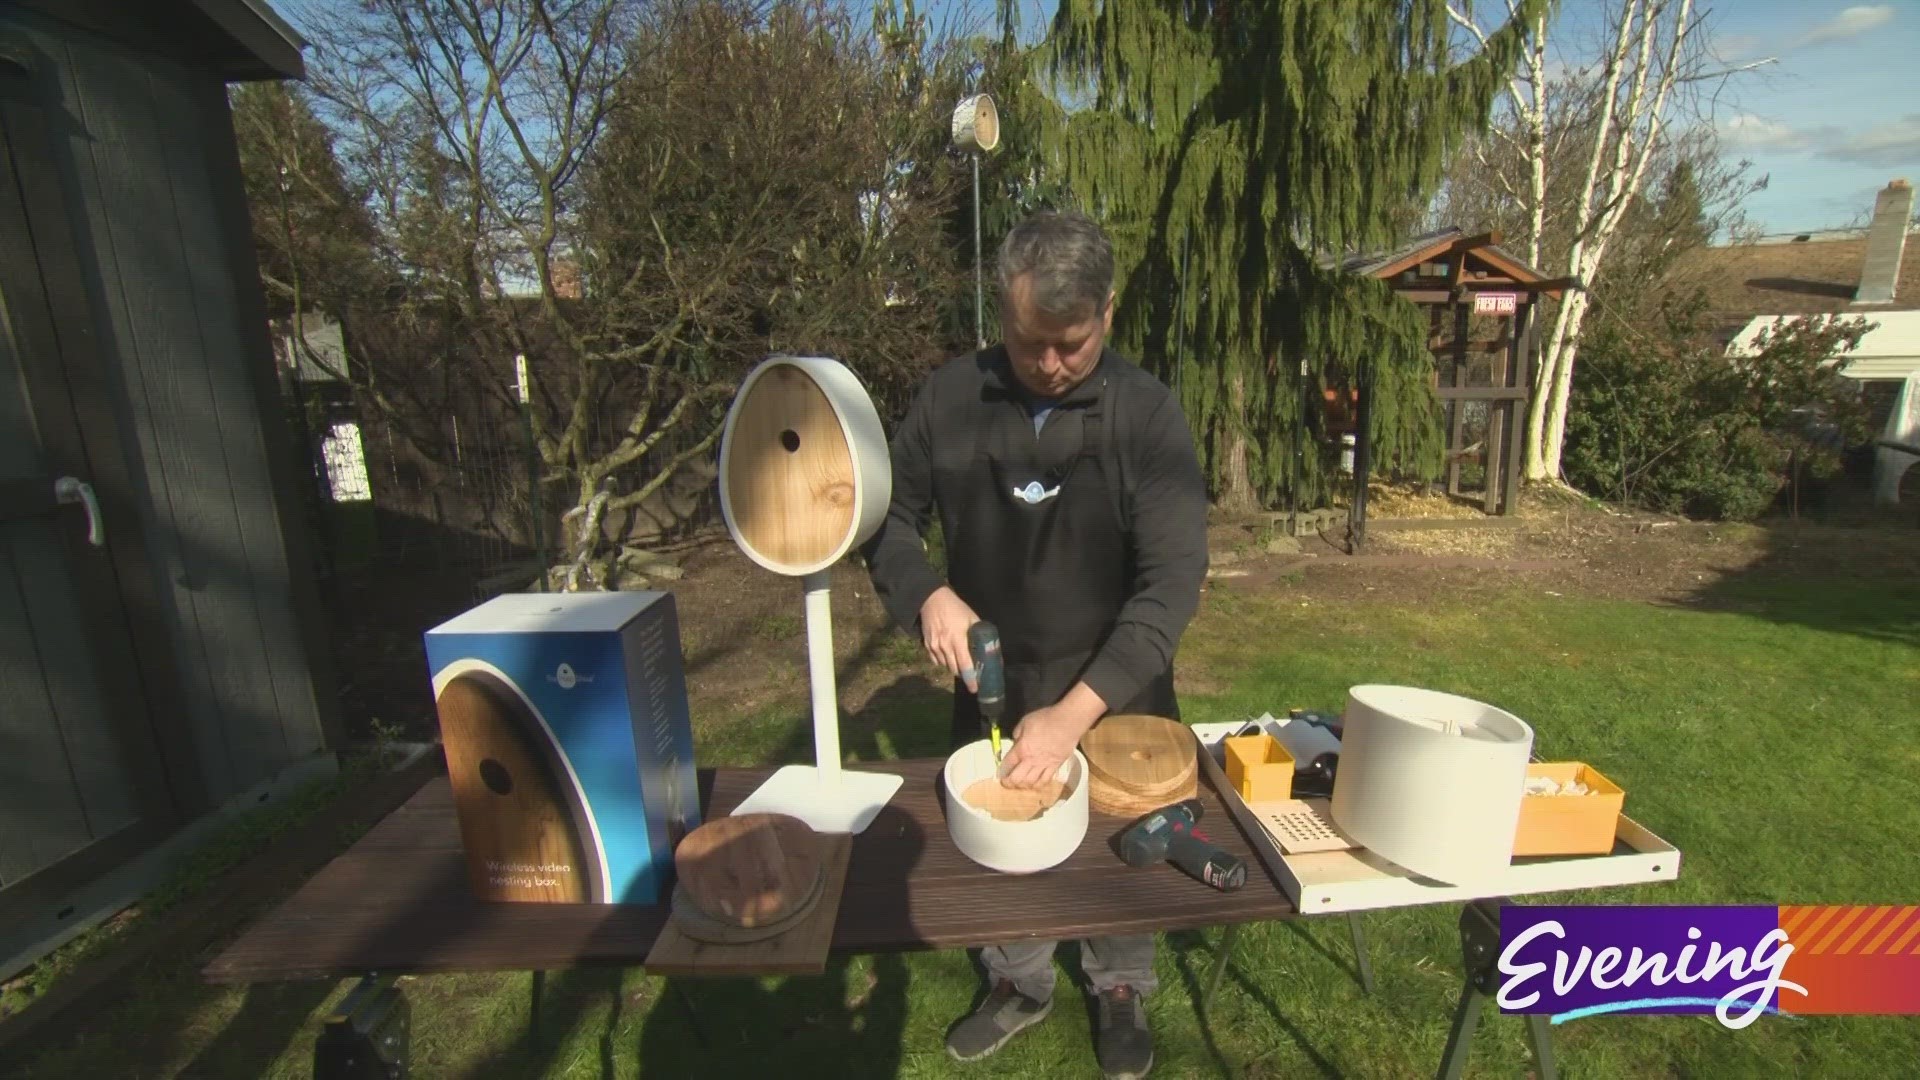 Feathered friends become family with this Seattle man's invention. #k5evening